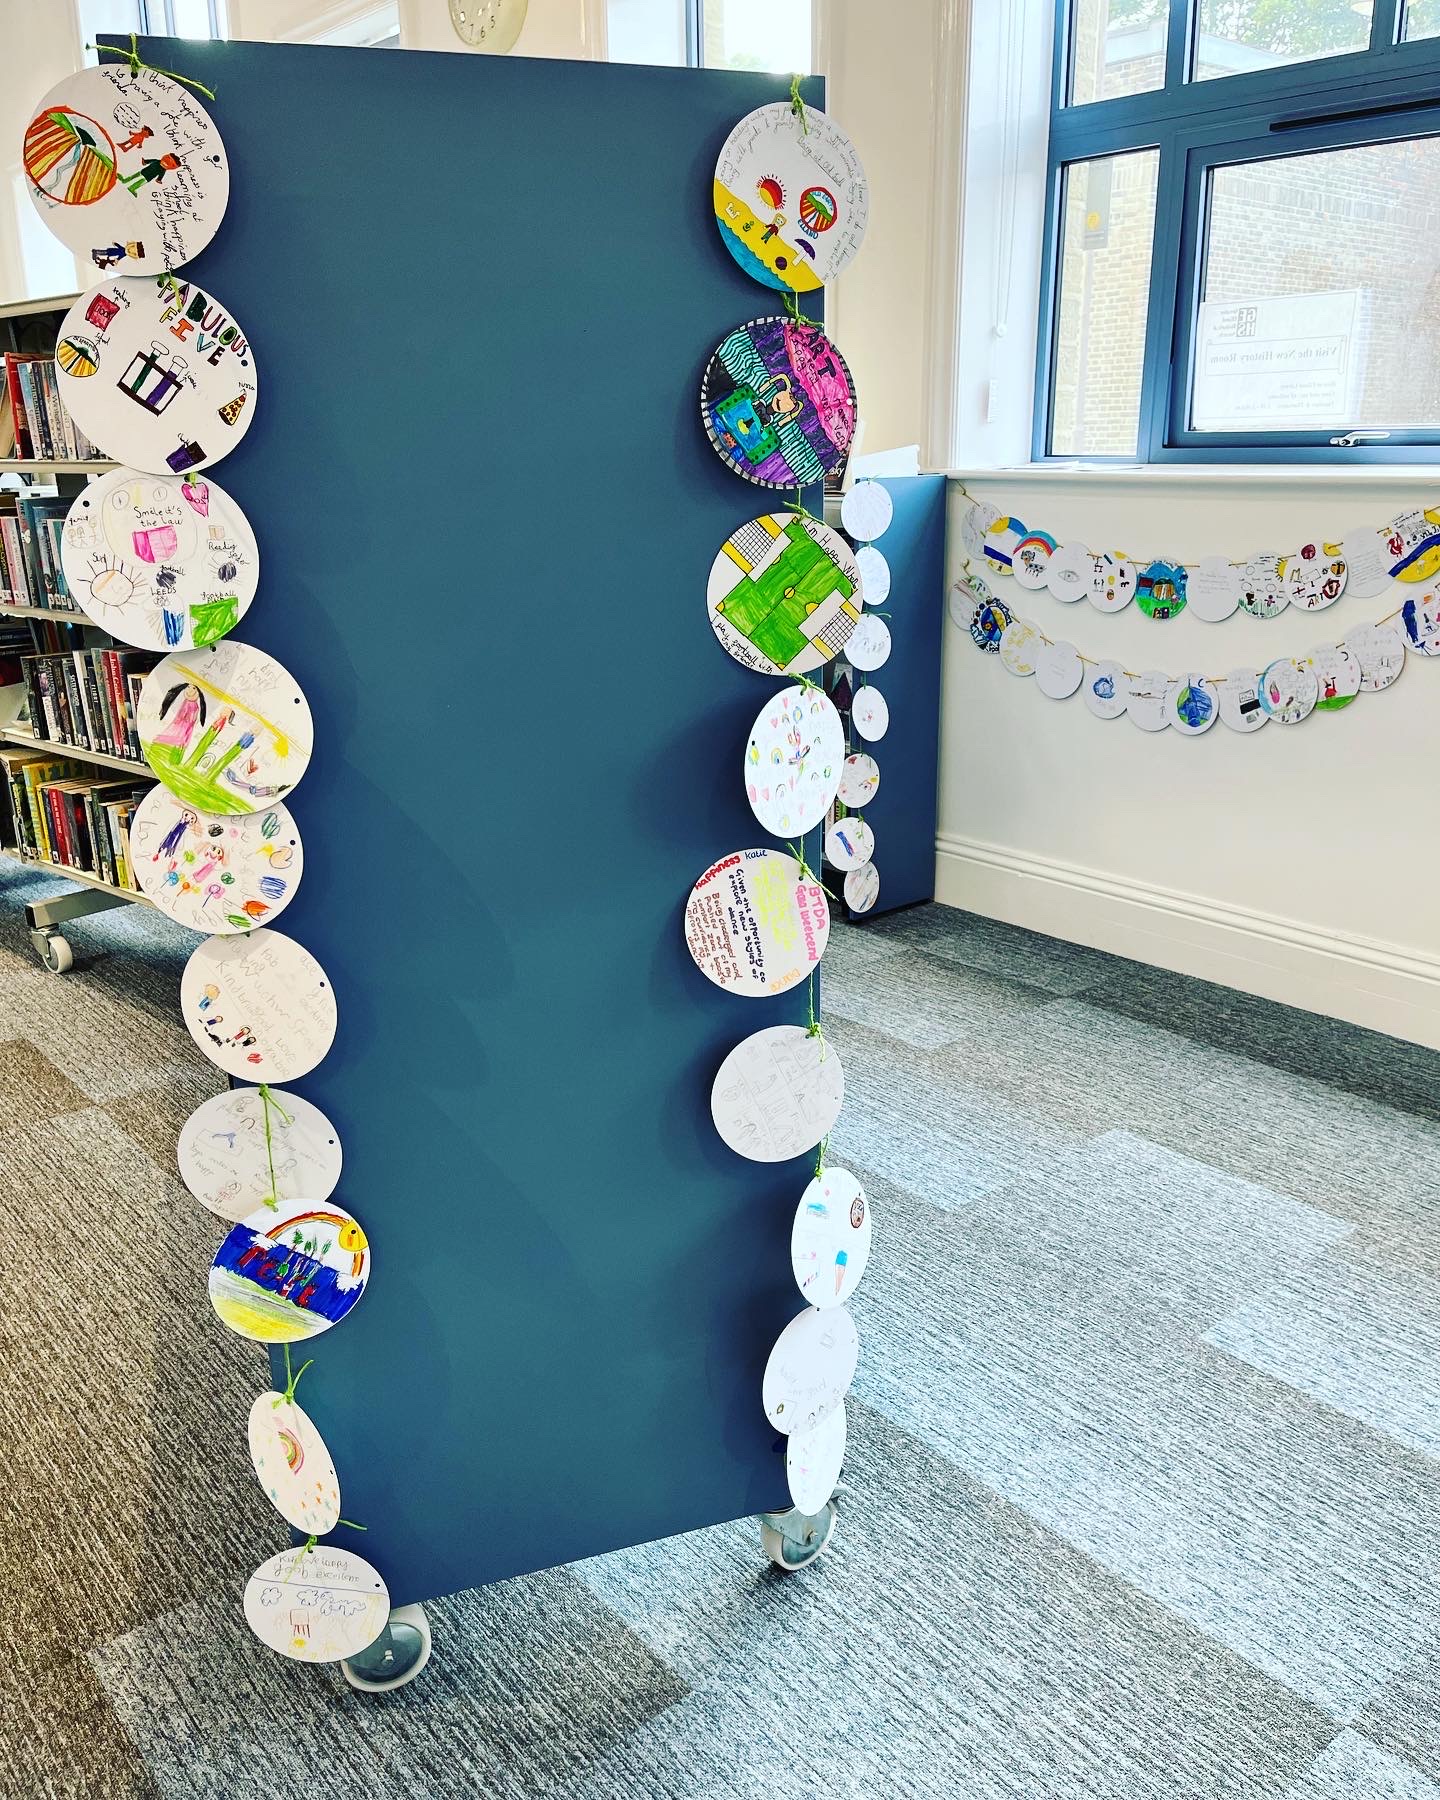 Colourful circular cards hang down the side of a bookcase